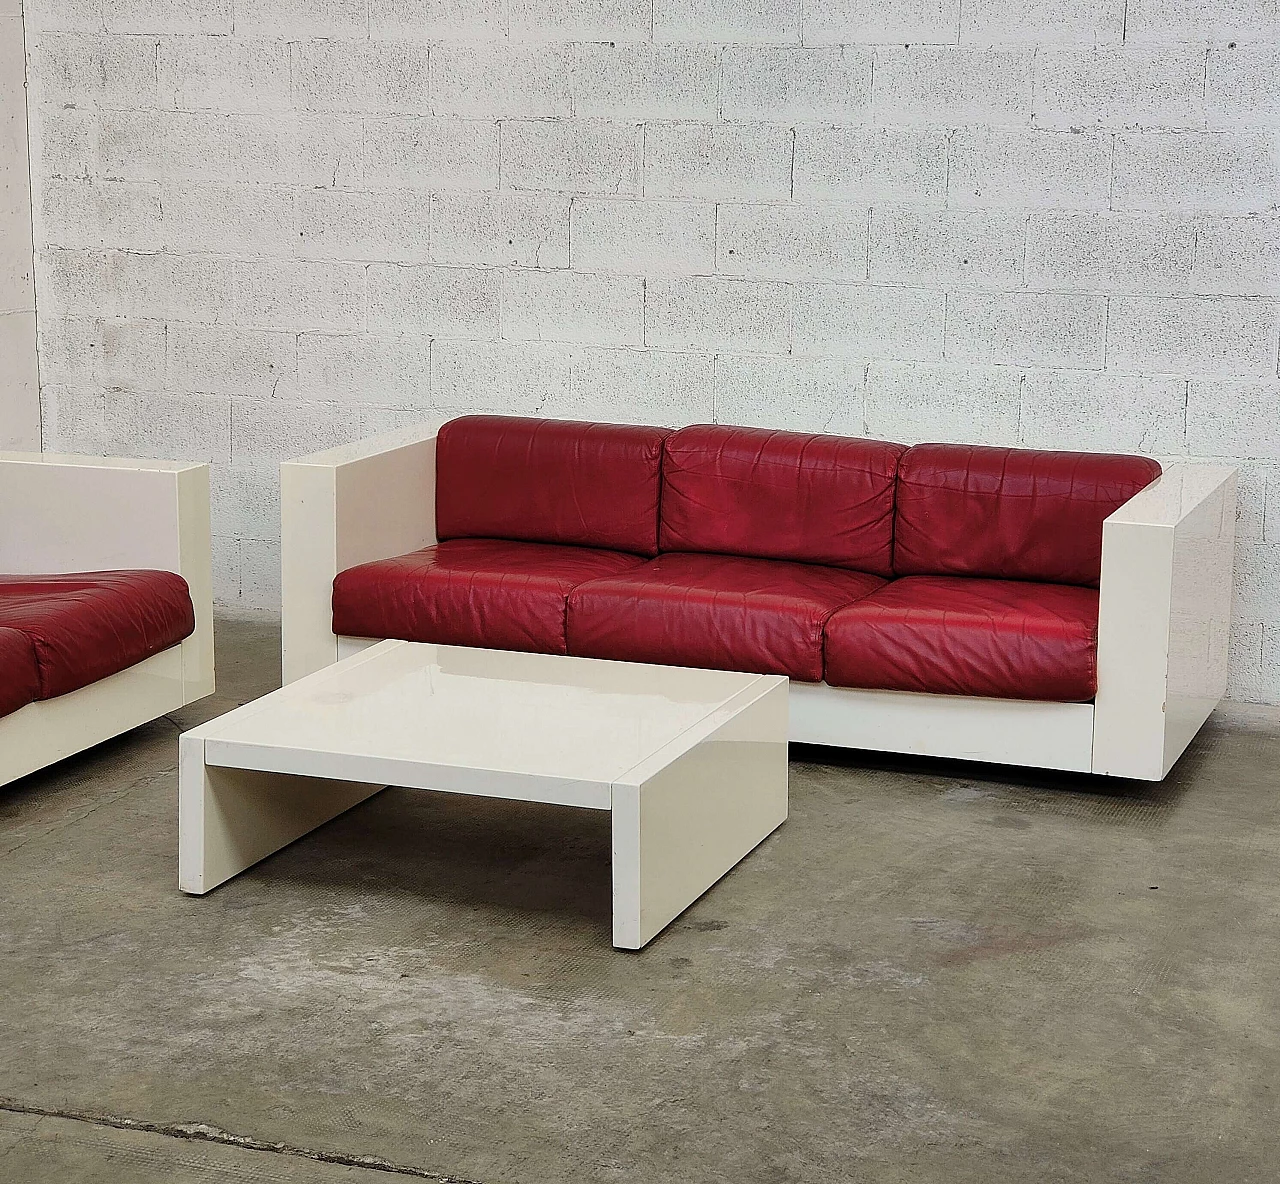 Pair of Saratoga sofas and coffee table by Lella and Massimo Vignelli for Saratoga, 1964 4